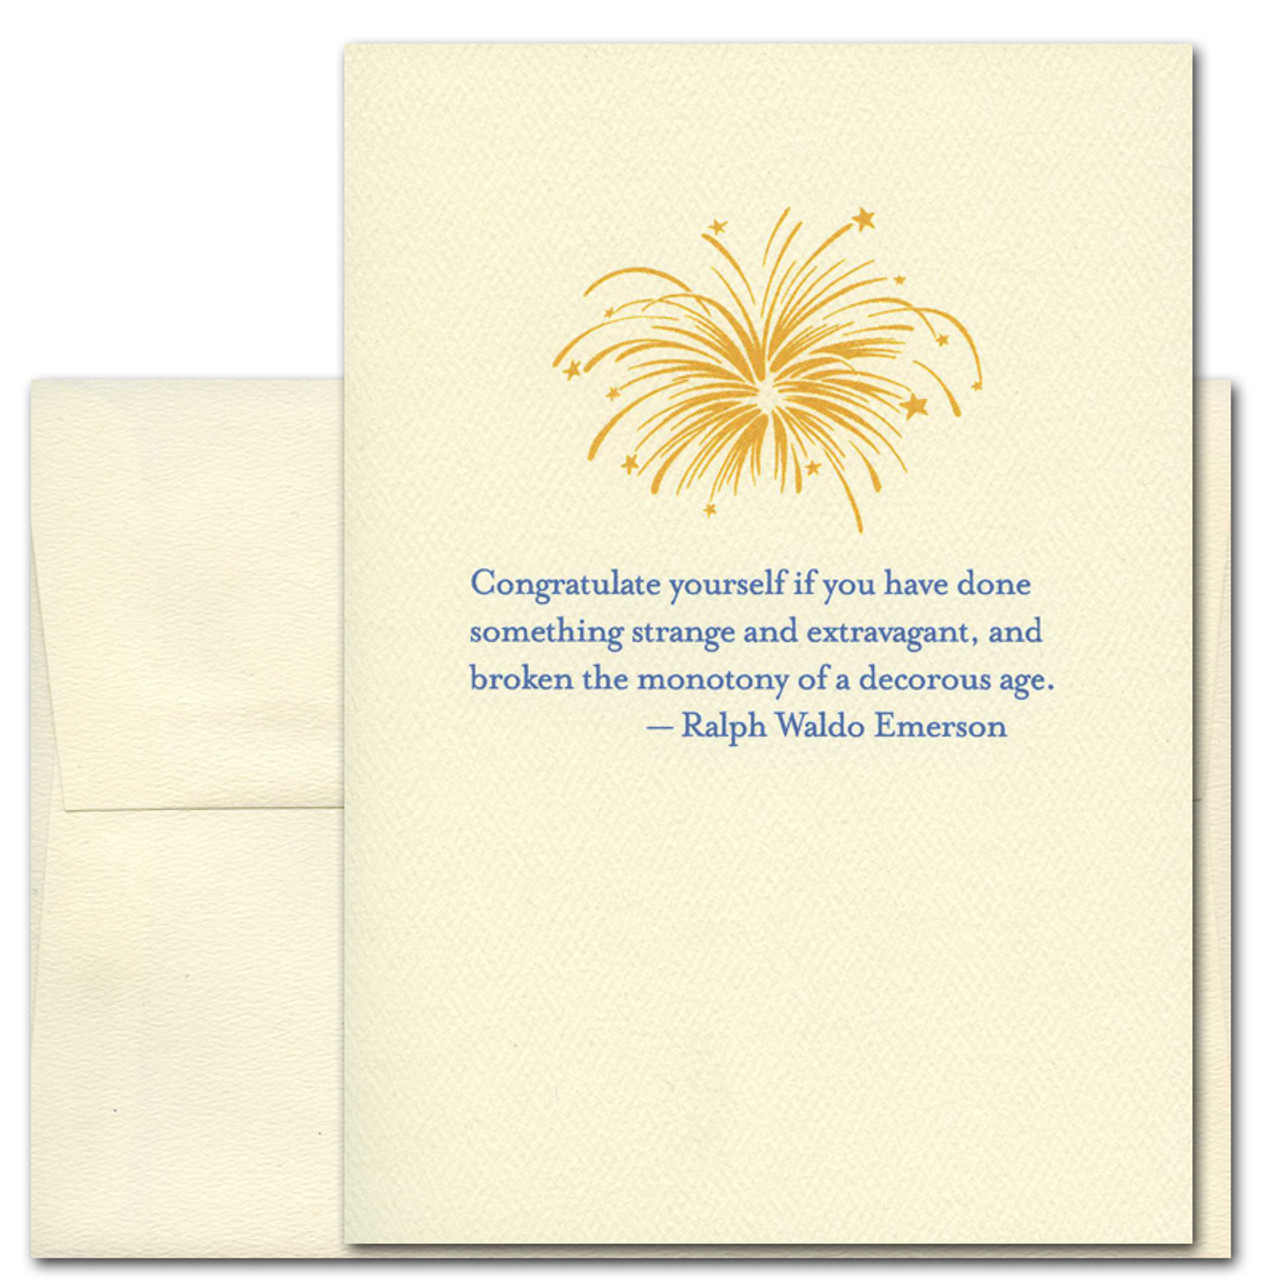 Quotation Card Congratulate Yourself: Emerson Cover shows gold vintage style fireworks drawing with stars and a quote by Ralph Waldo Emerson reading: Congratulate yourself if you have done something strange and extravagant, and broken the monotony of a decorous age.